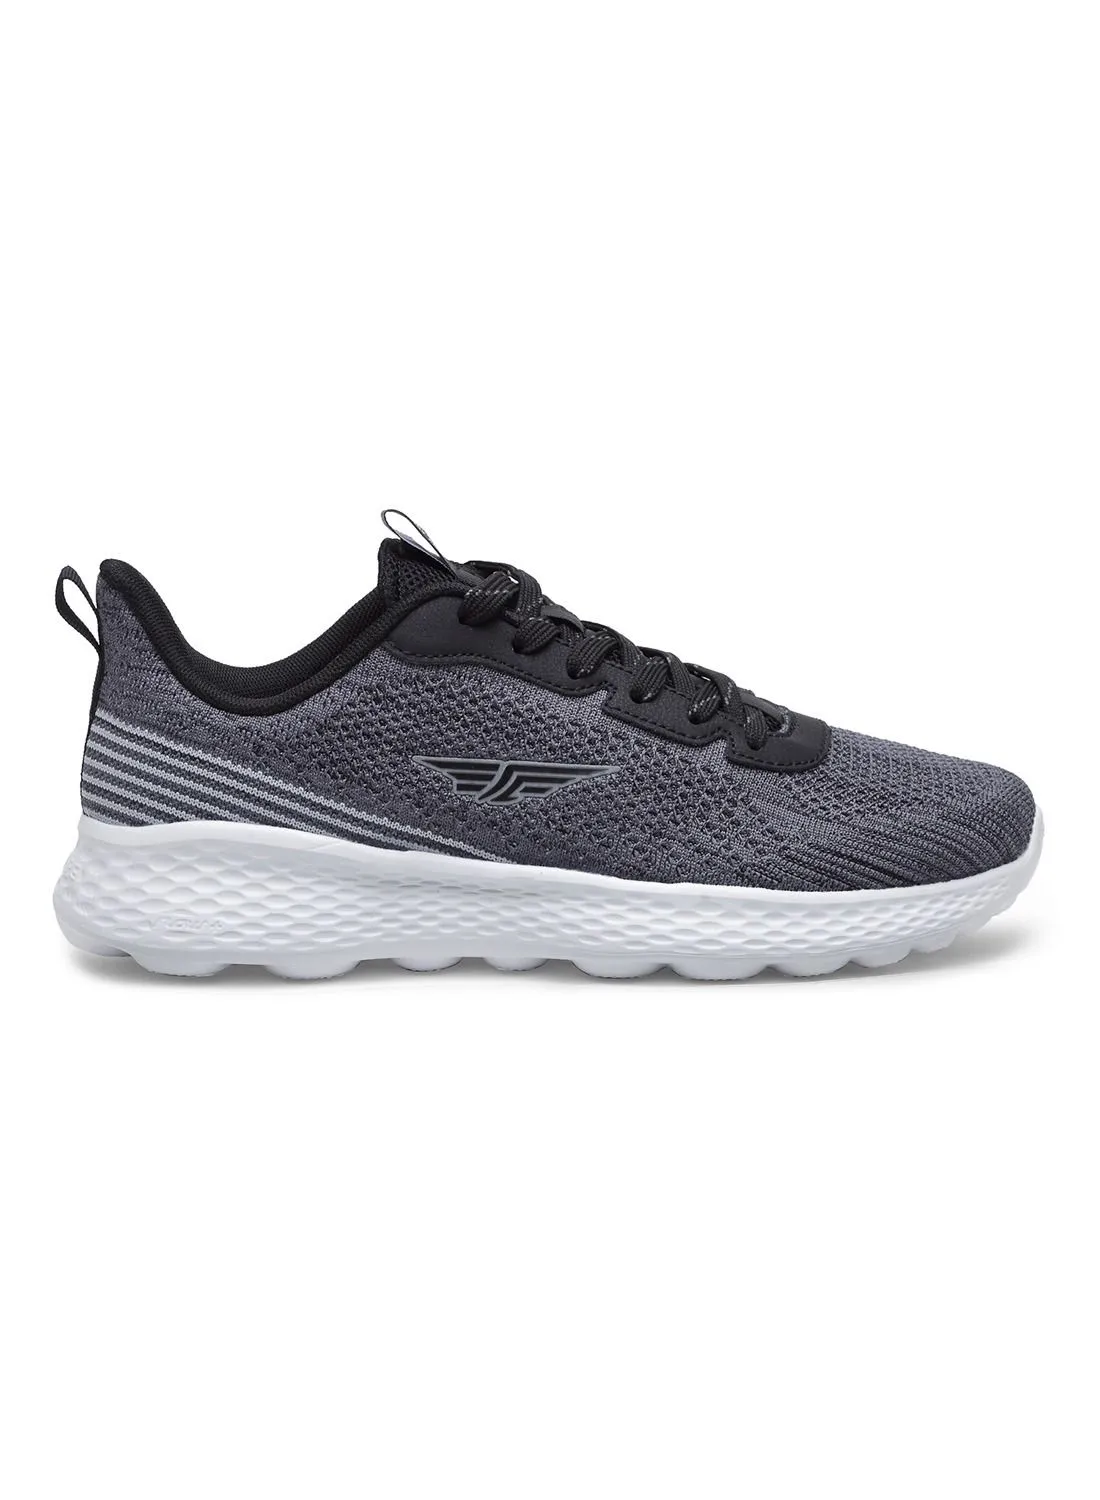 Red Tape Sports Athleisure Shoes For Men